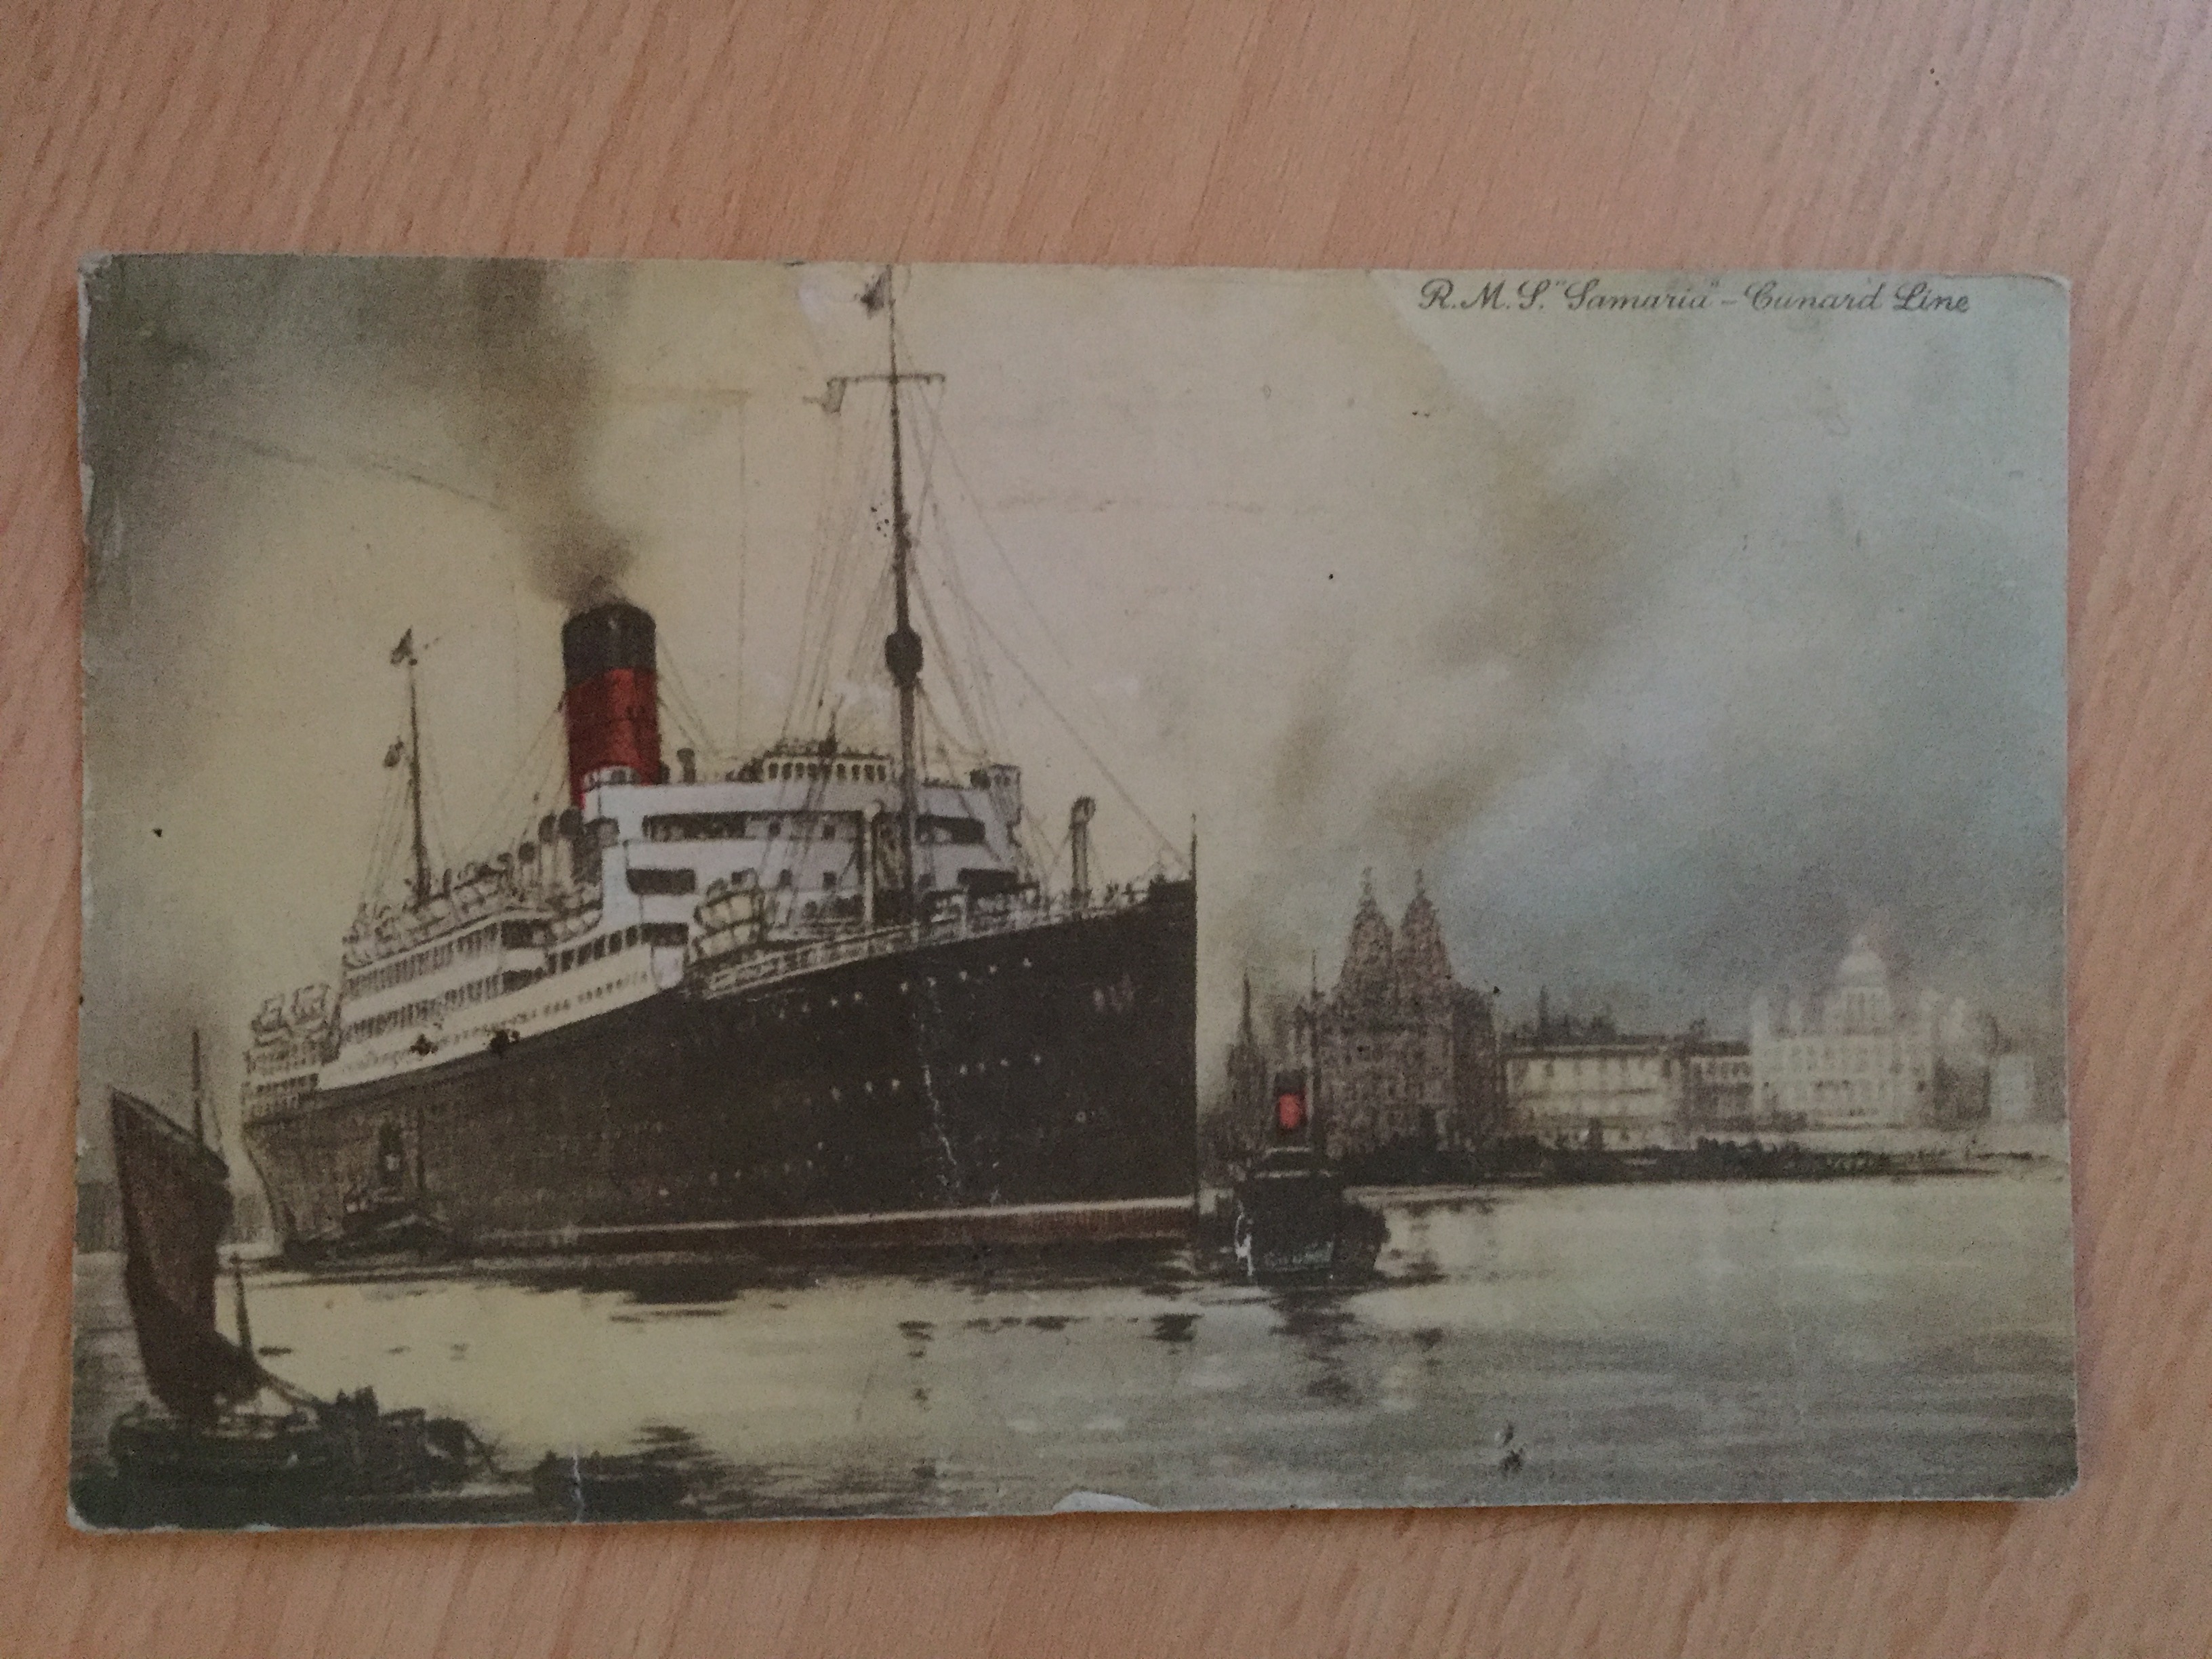 EARLY POSTCARD OF THE WHITE STAR LINE VESSEL THE SAMARIA